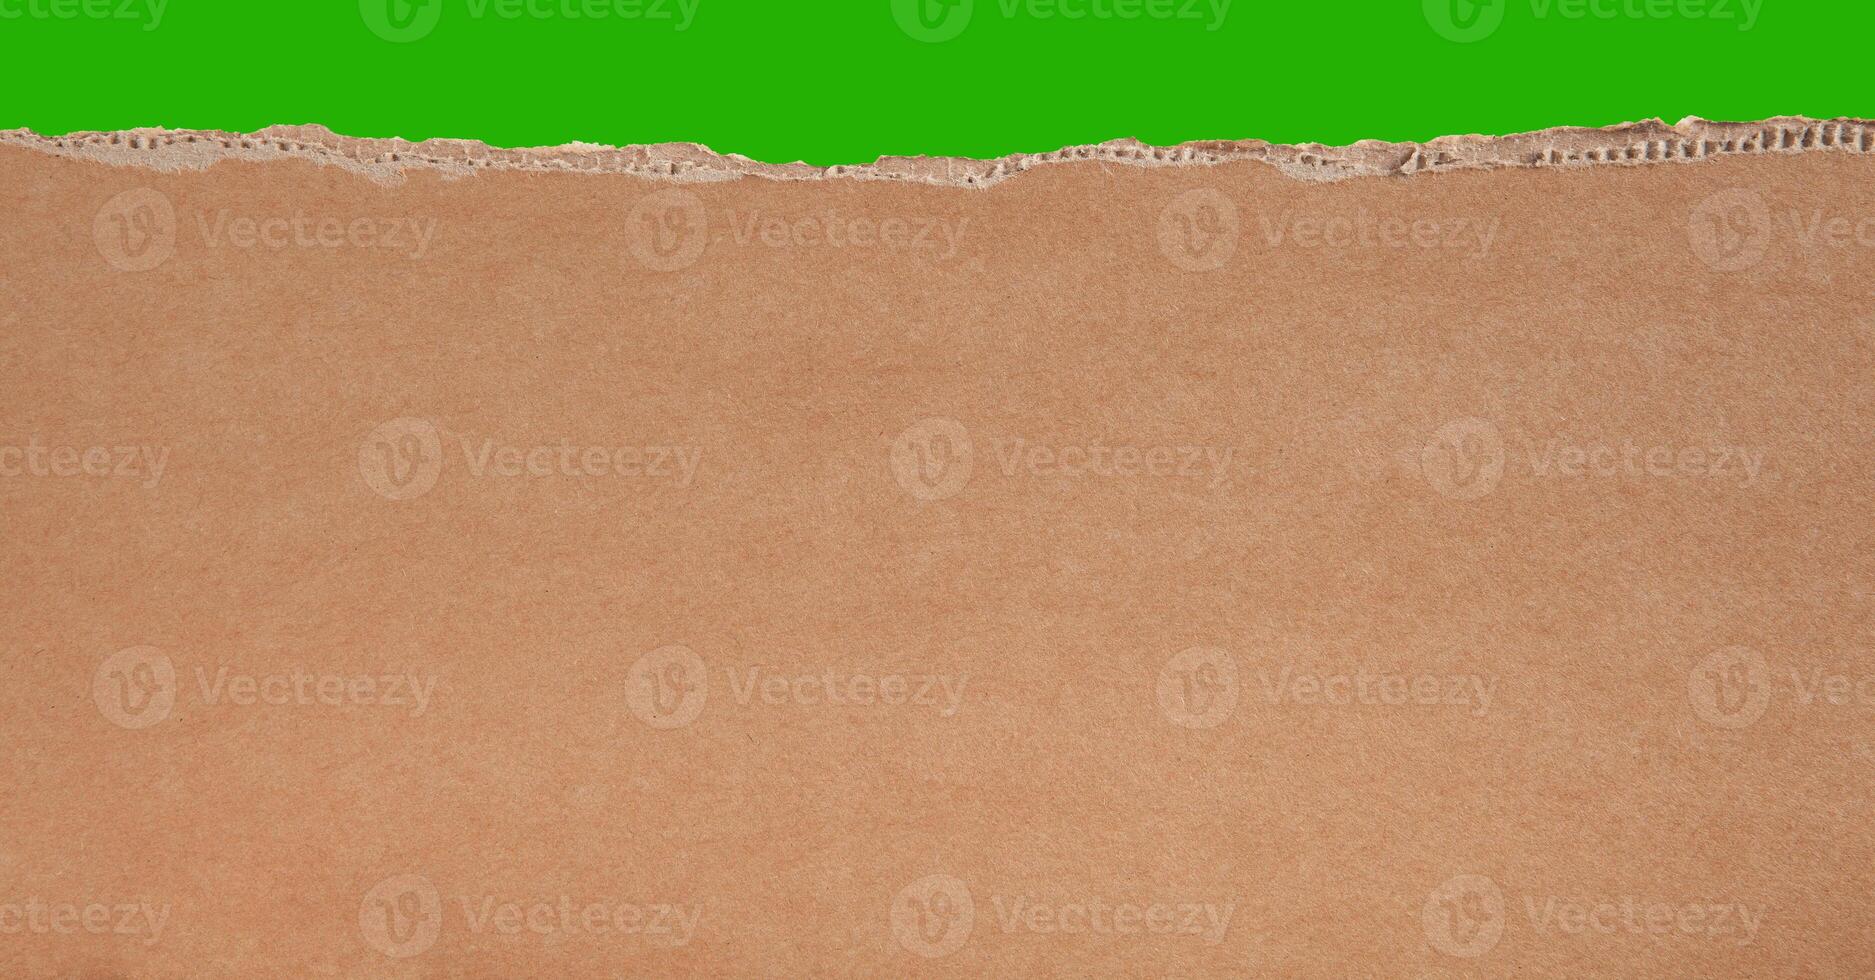 Green screen cardboard texture background. Old vintage brown paper box surface. photo